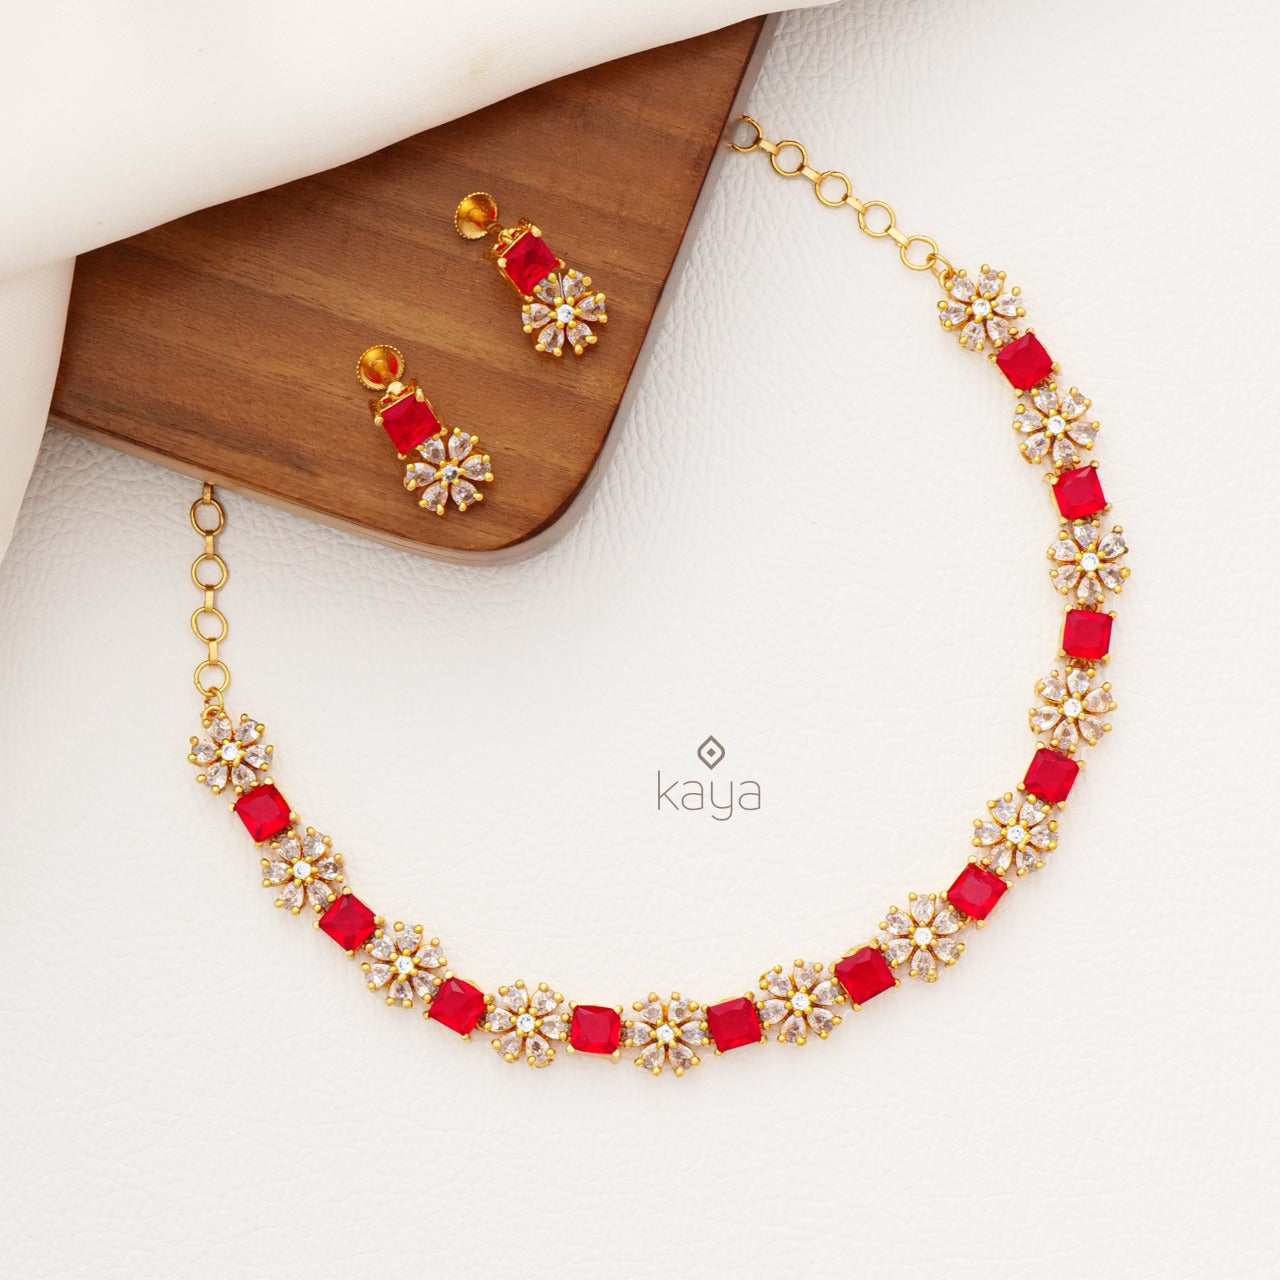 Gold Tone Stone Necklace Earrings set SG100192 (color option)